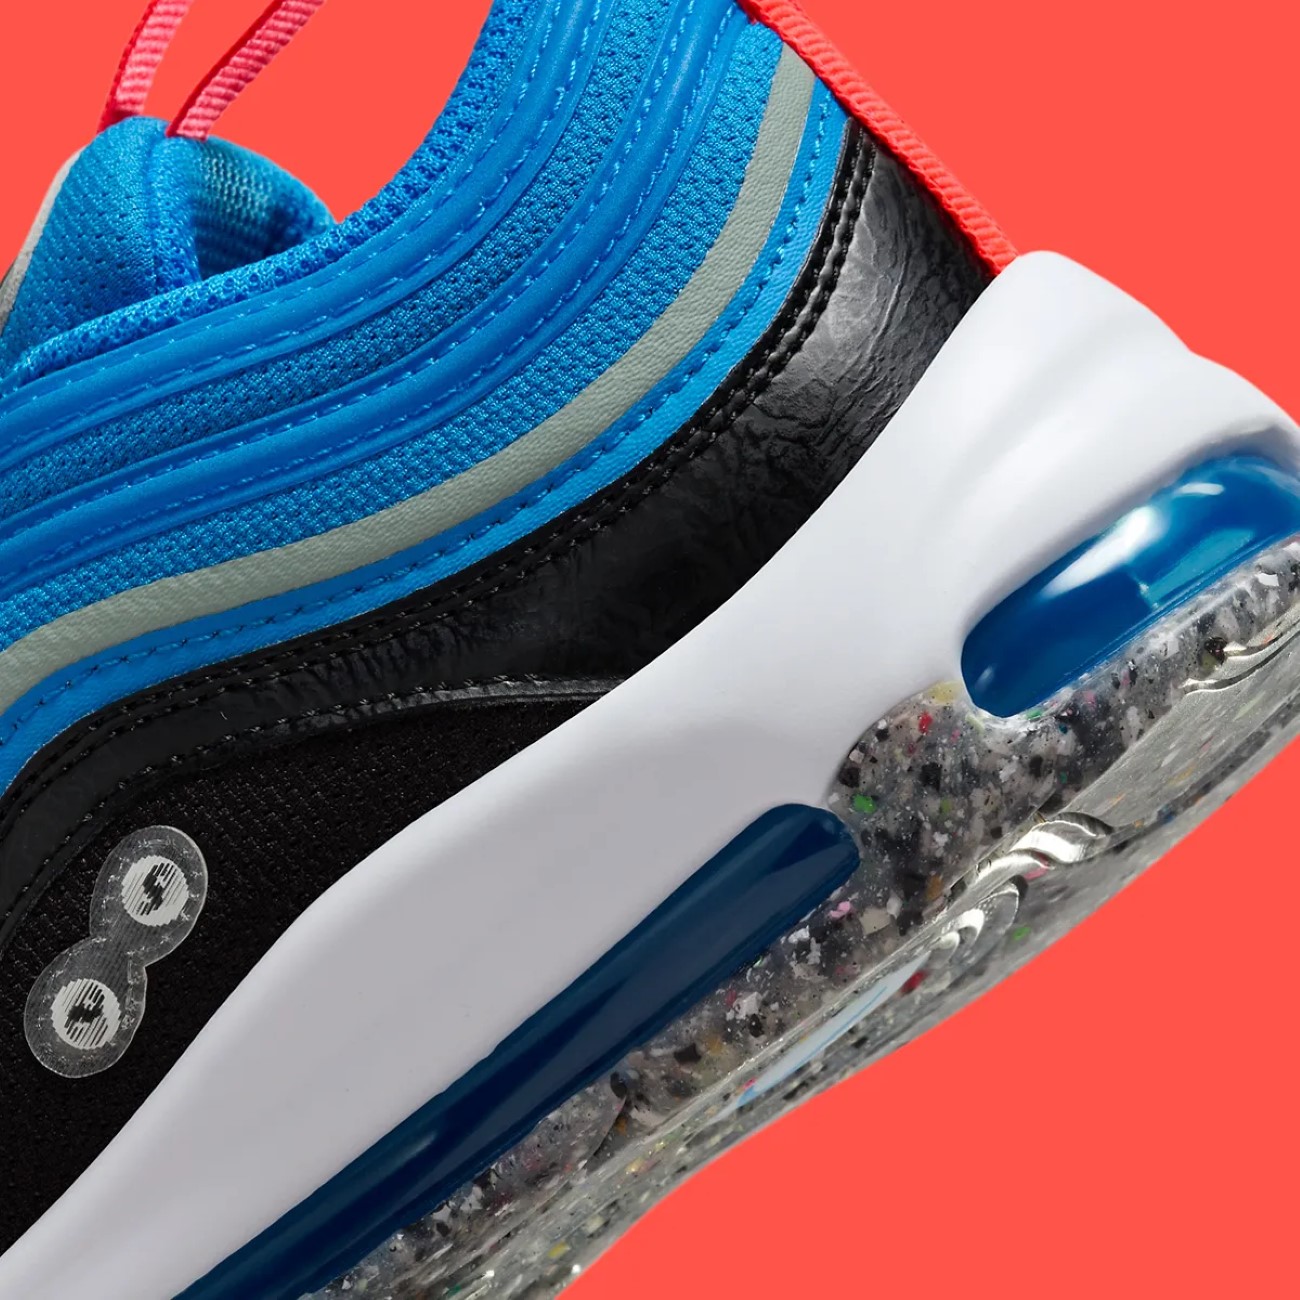 Nike Air Max 97 "Just Do It" embraces playfulness